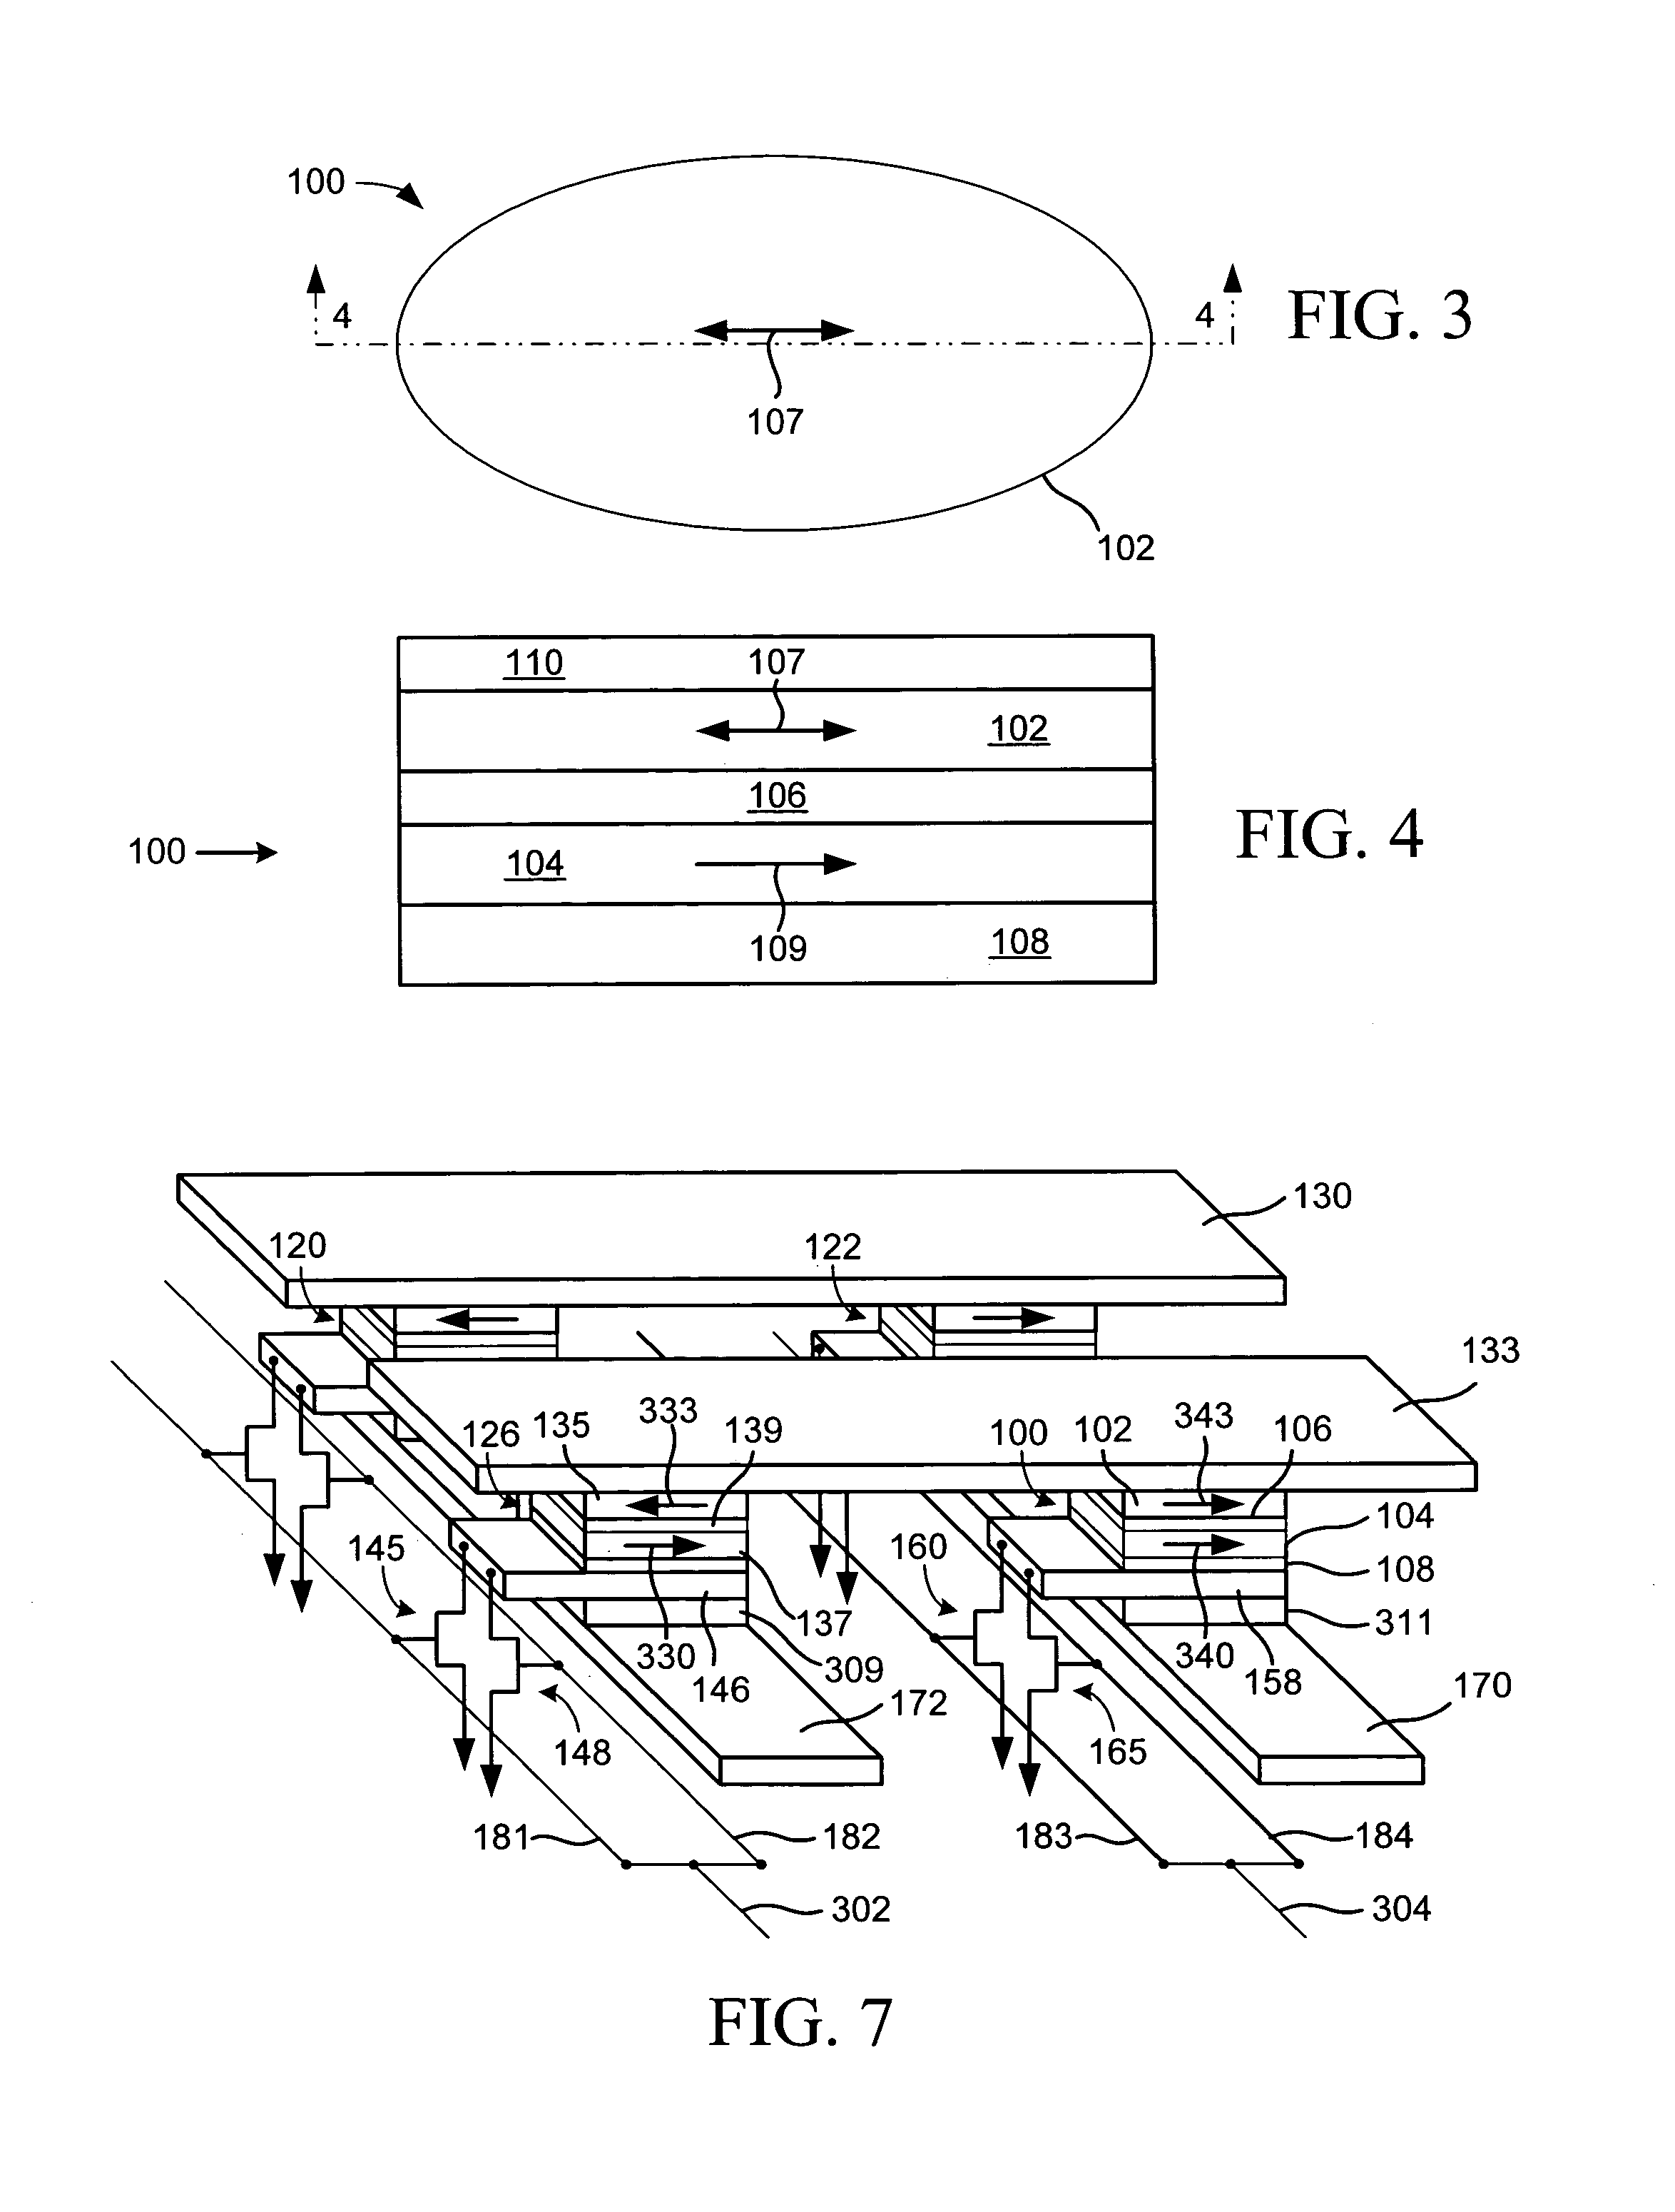 Magnetic memory cell with plural read transistors